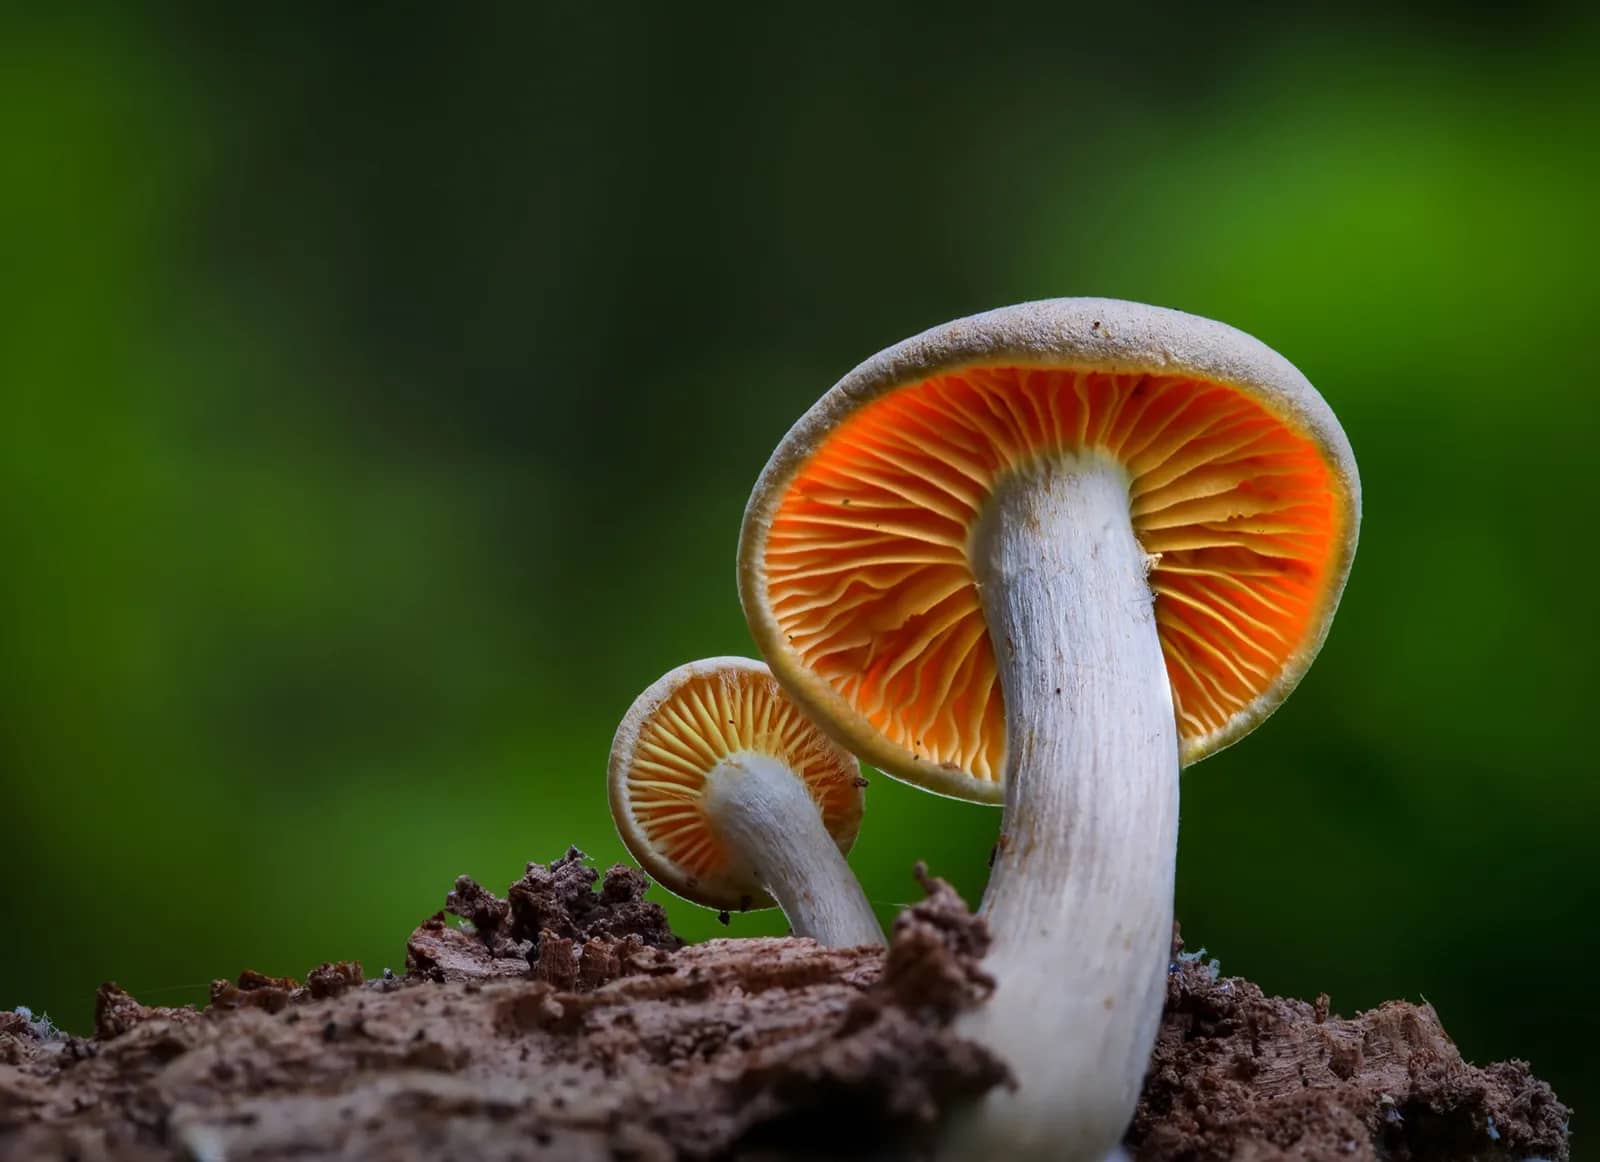 Two mushrooms with orange caps are growing